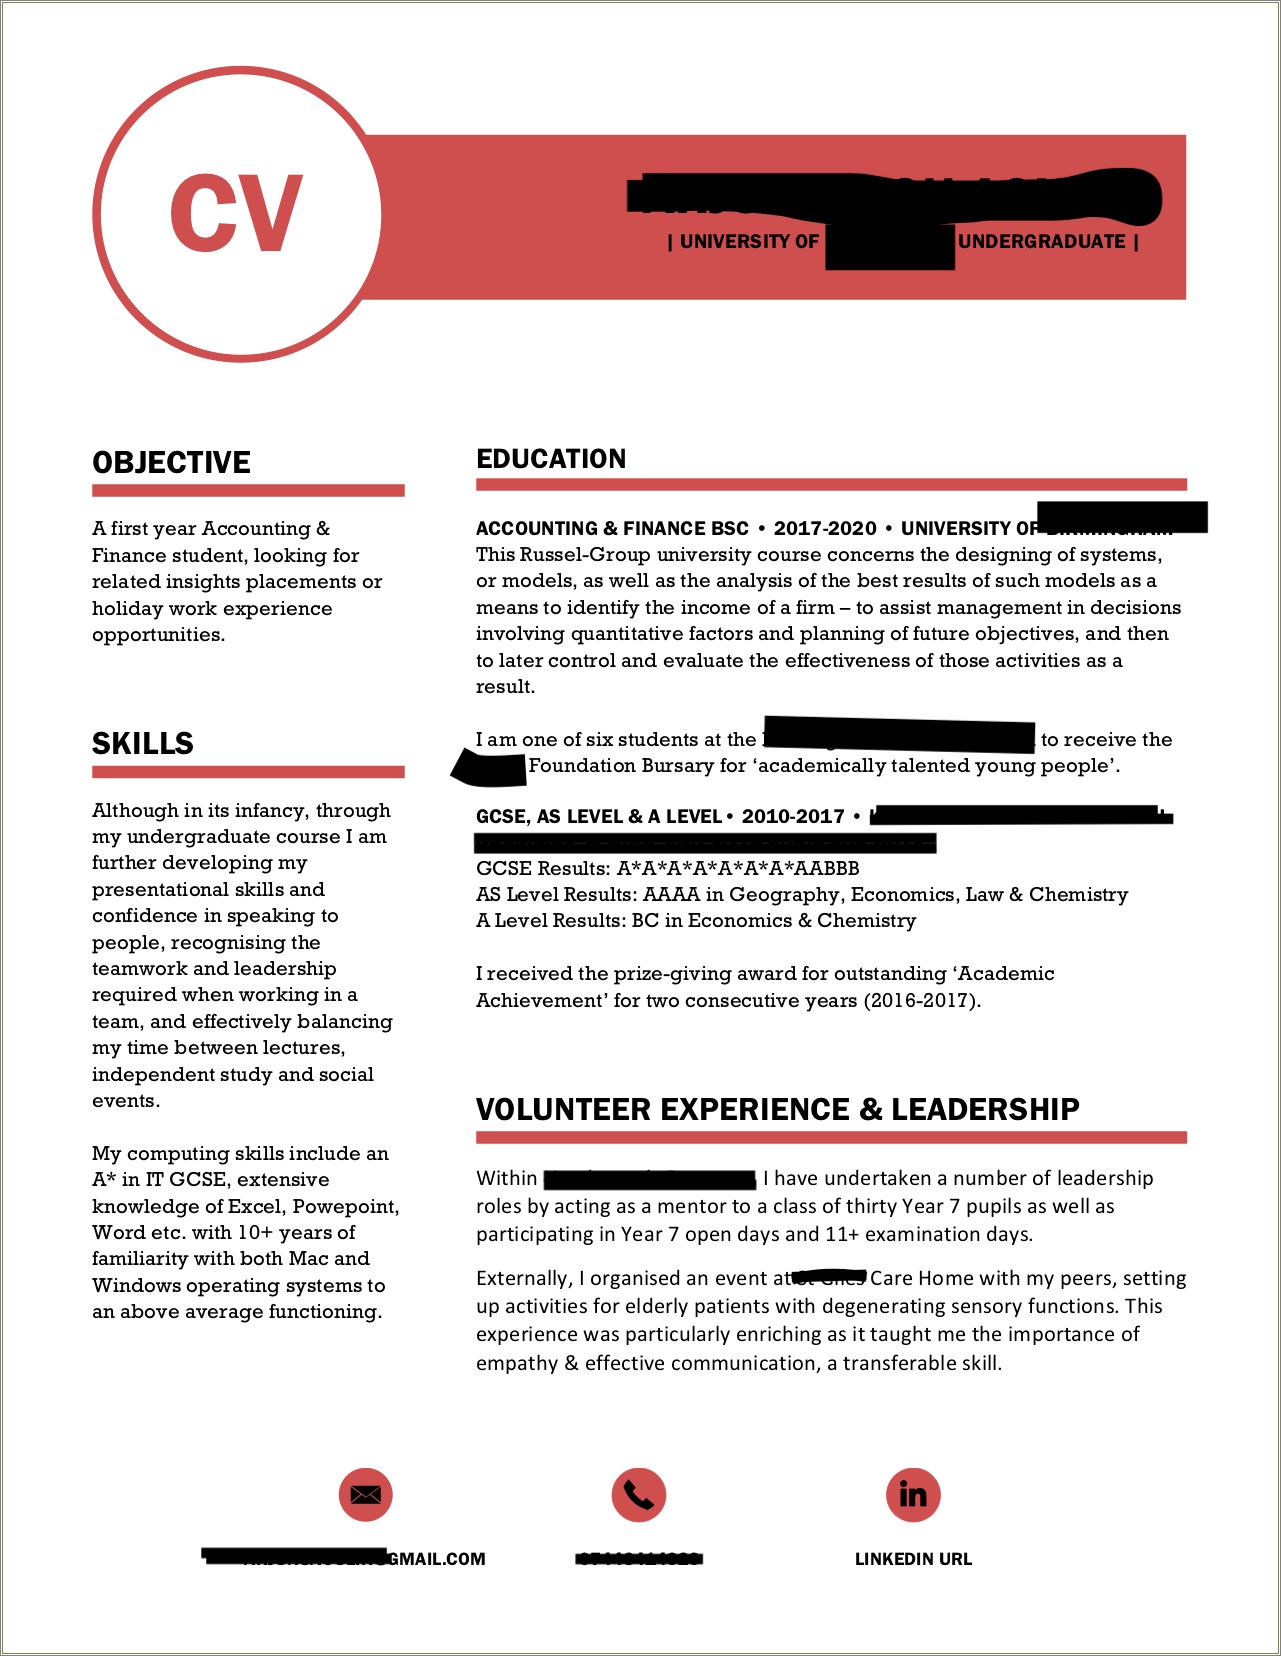 Find A Job That Fits My Resume